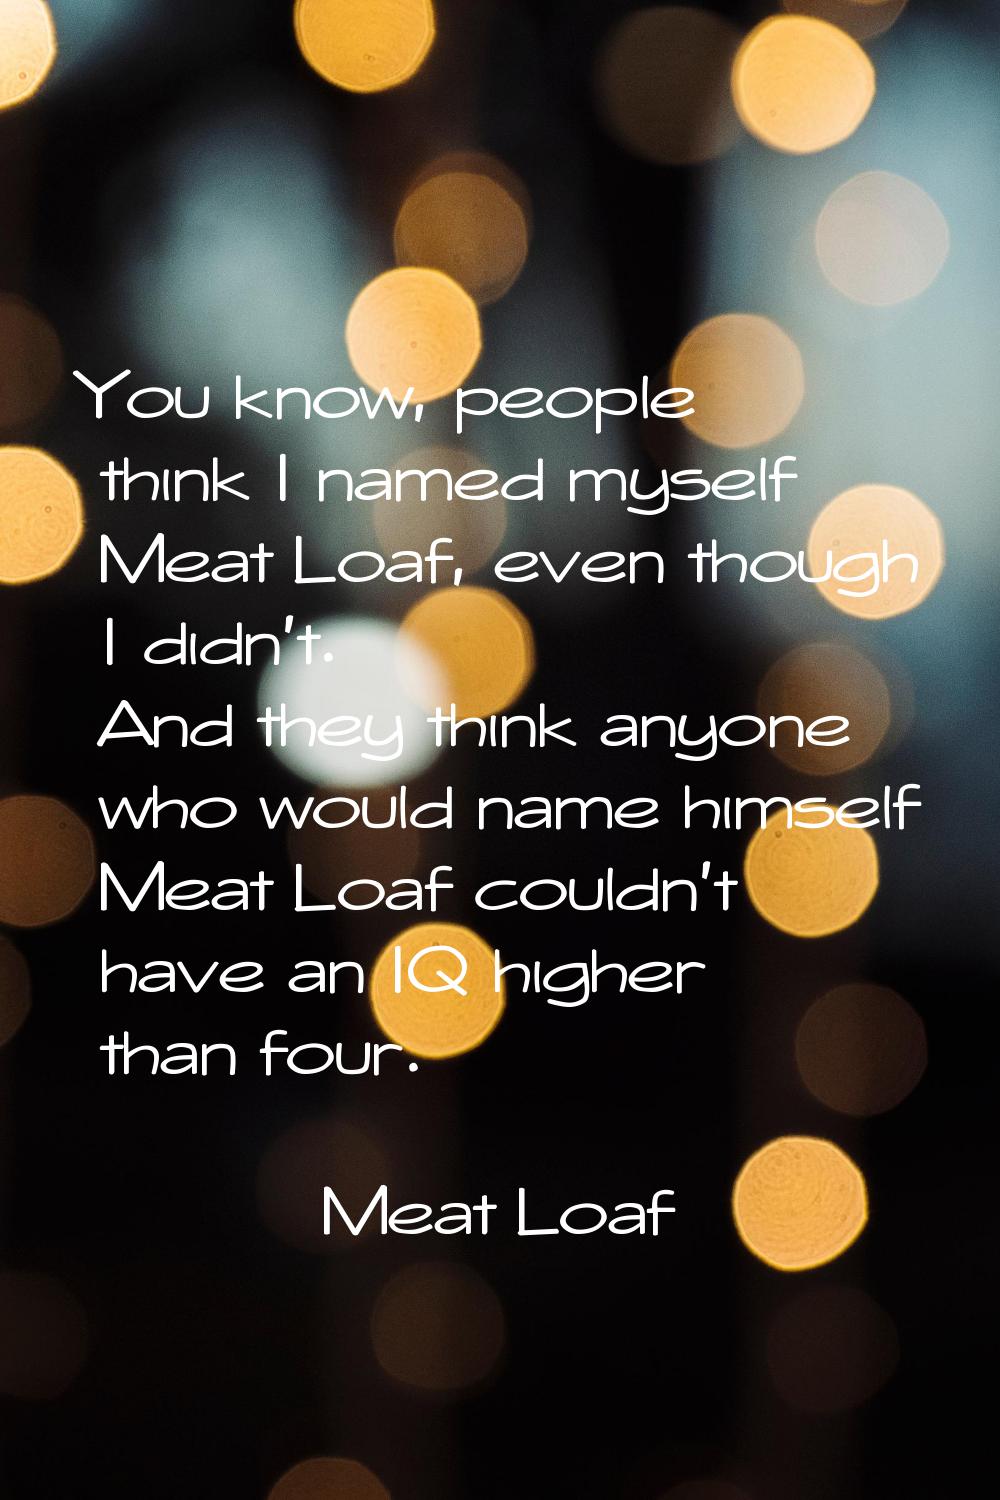 You know, people think I named myself Meat Loaf, even though I didn't. And they think anyone who wo